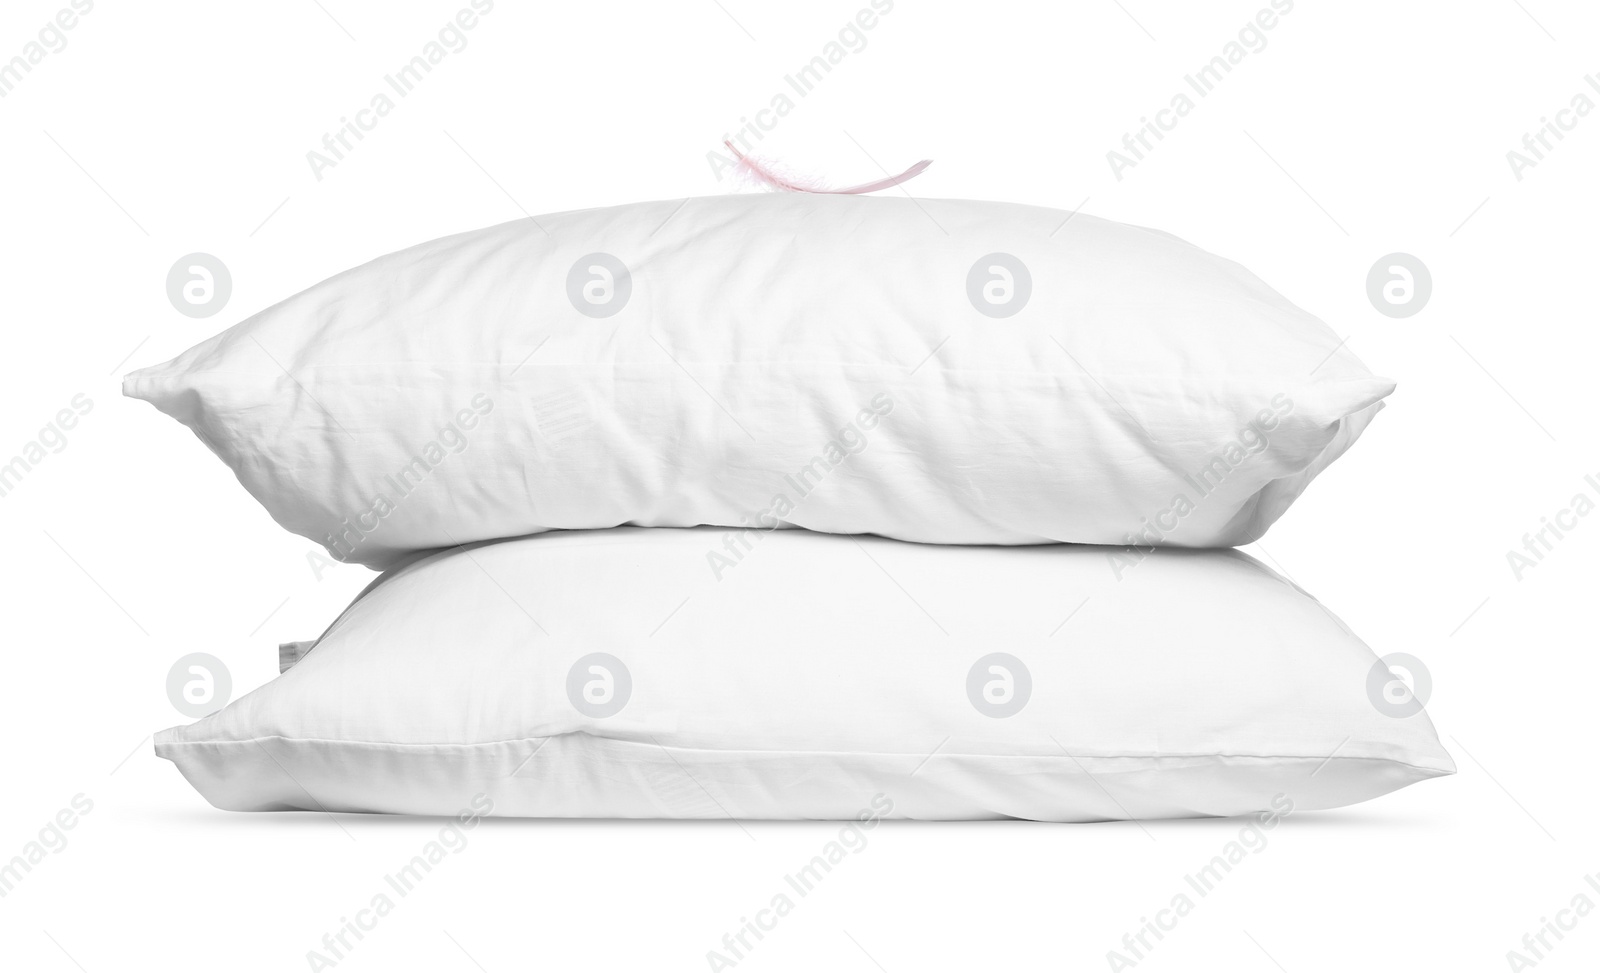 Photo of Blank soft new pillows isolated on white